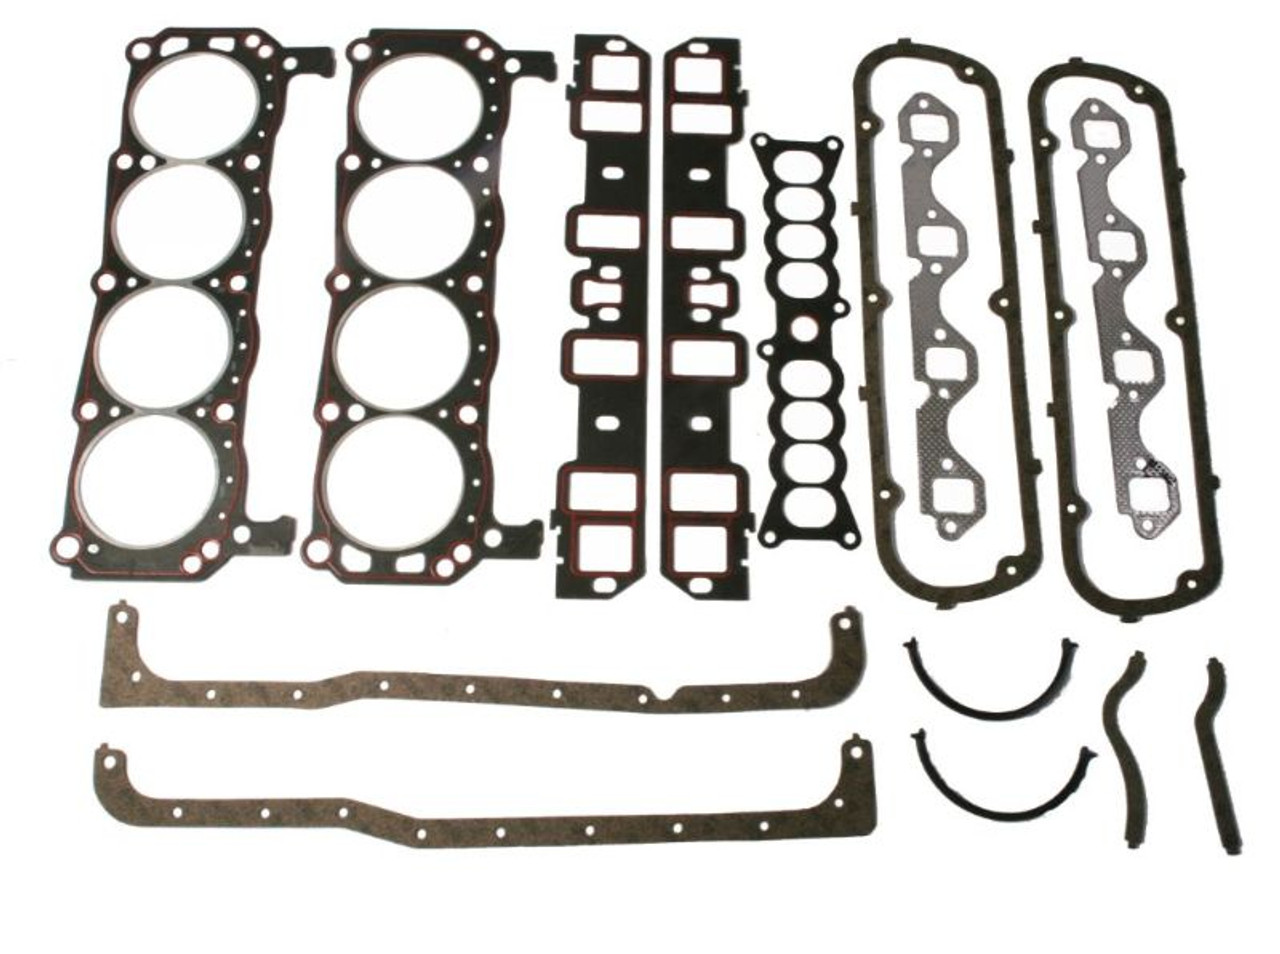 1988 Ford Country Squire 5.0L Engine Gasket Set F302L -43